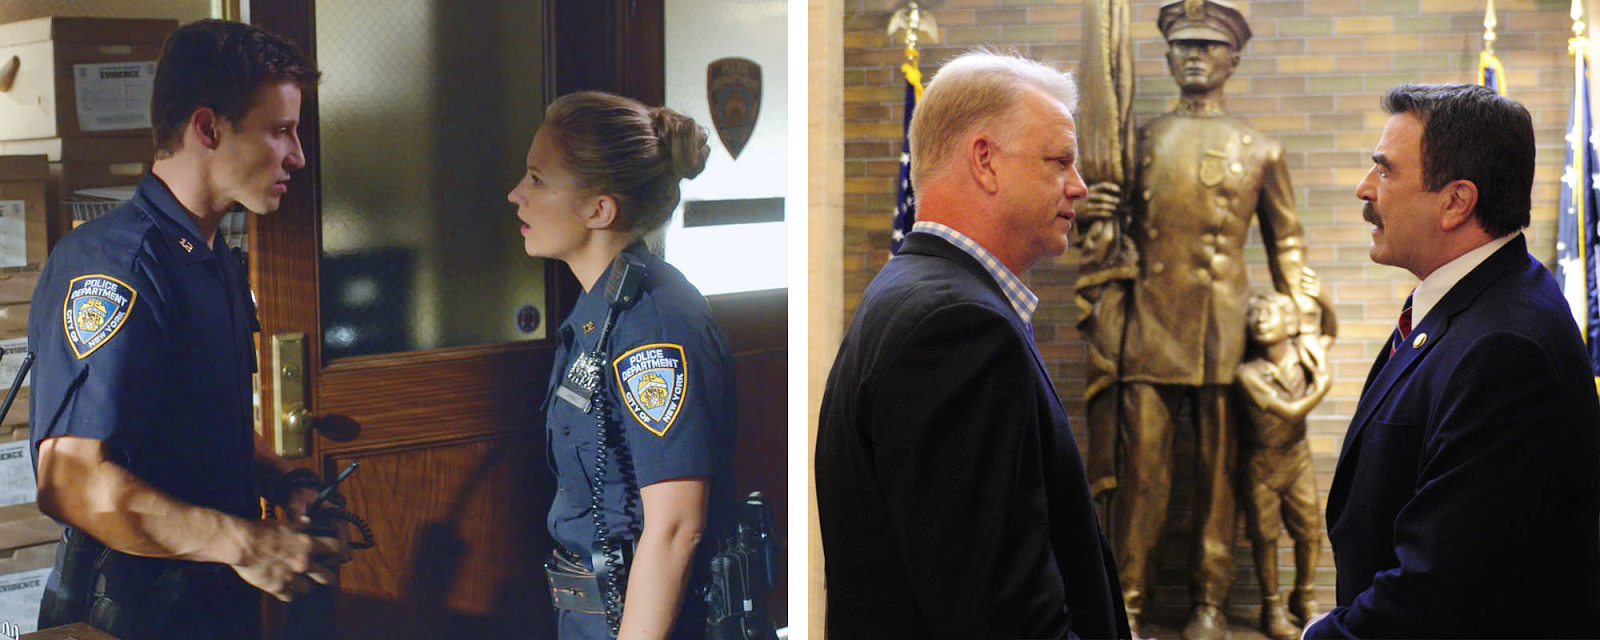 Blue Bloods - Episode 5.02 - Forgive and Forget - Press Release